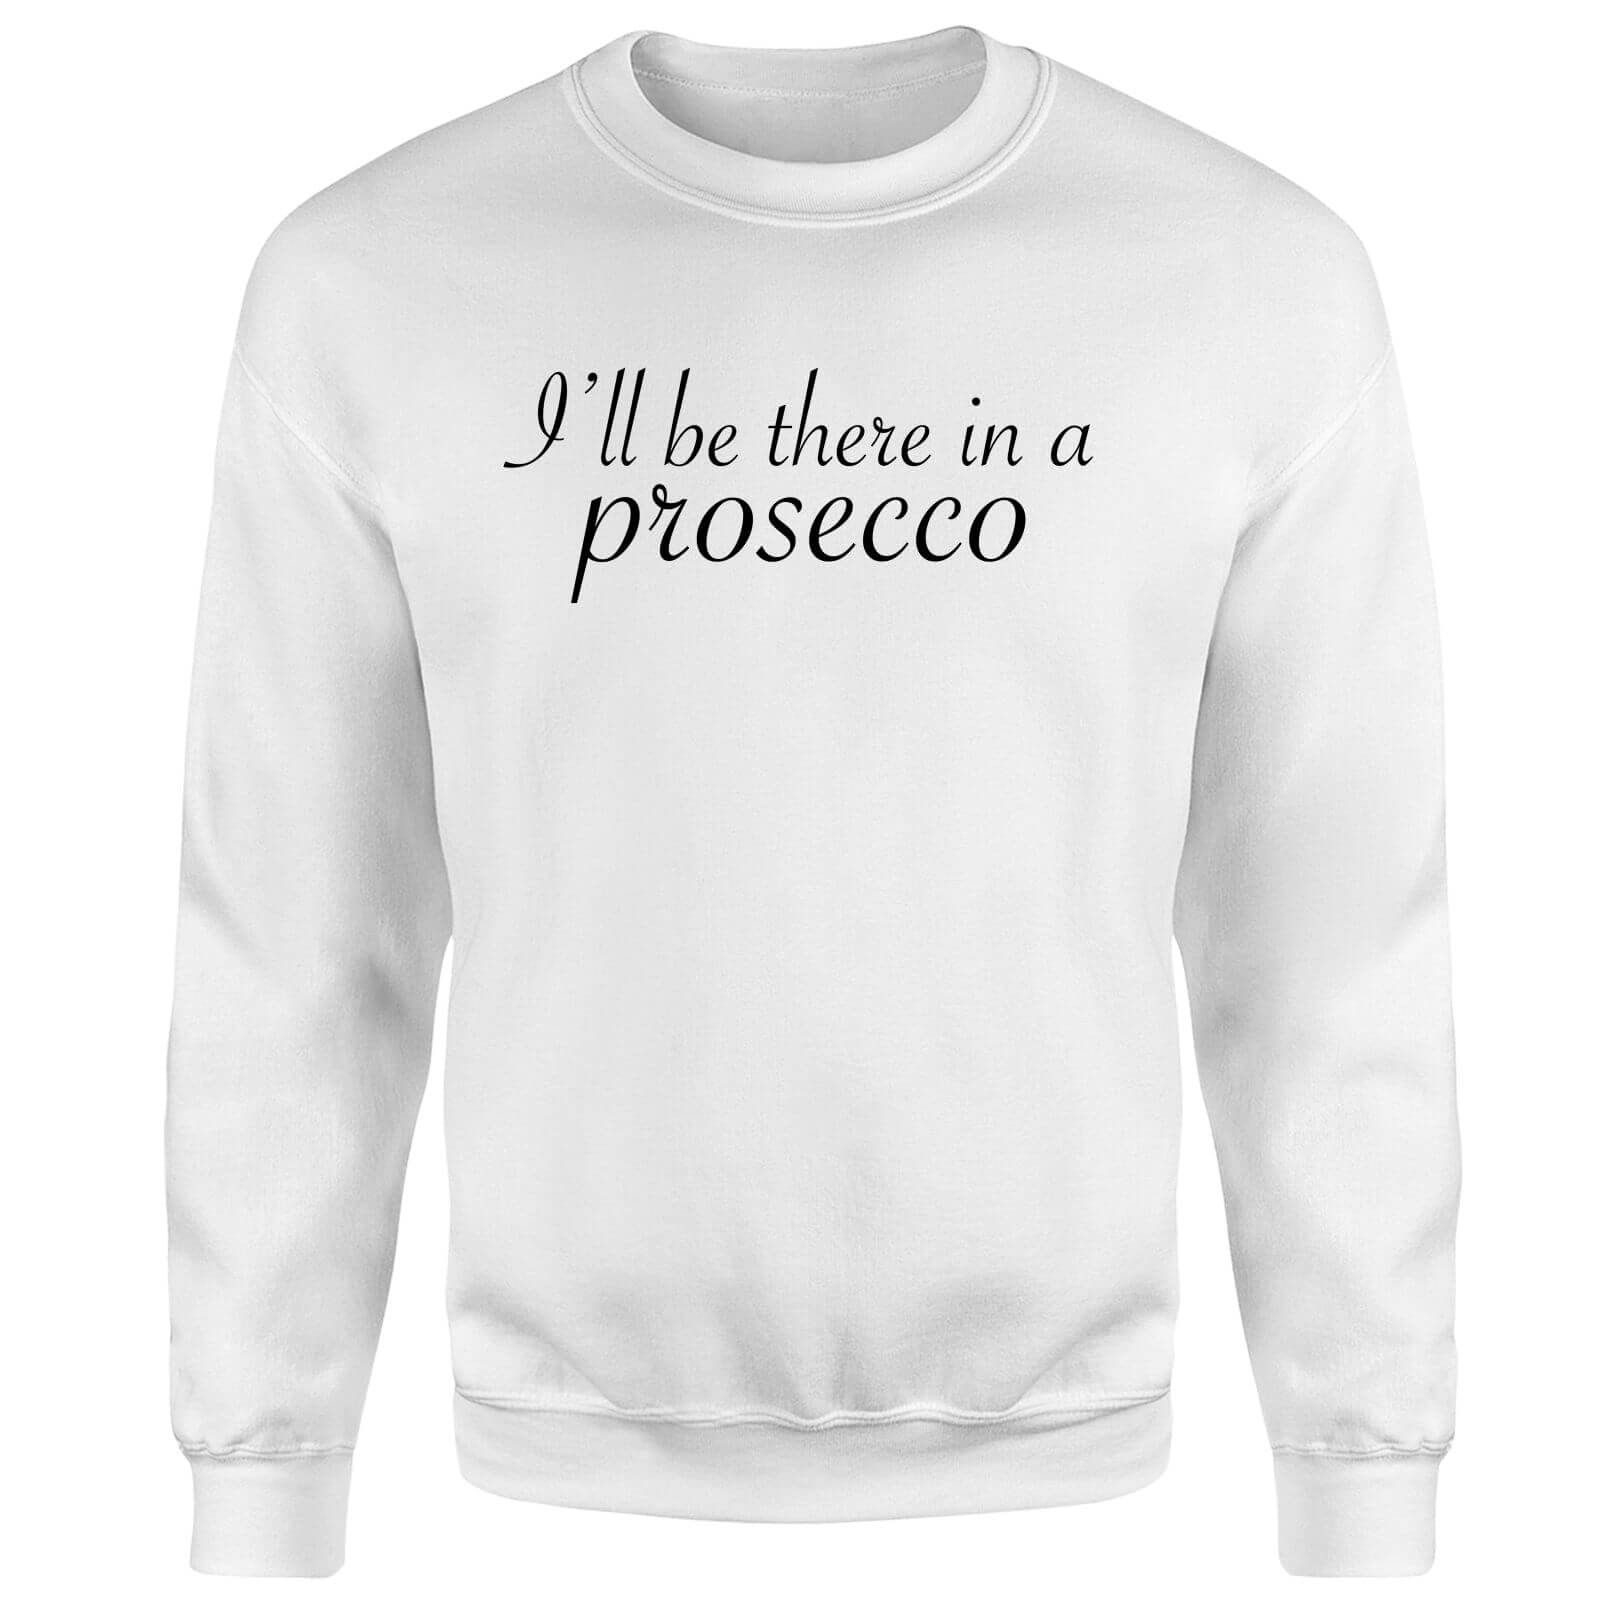 I'll be there in a Prosecco Sweatshirt - White - S - White